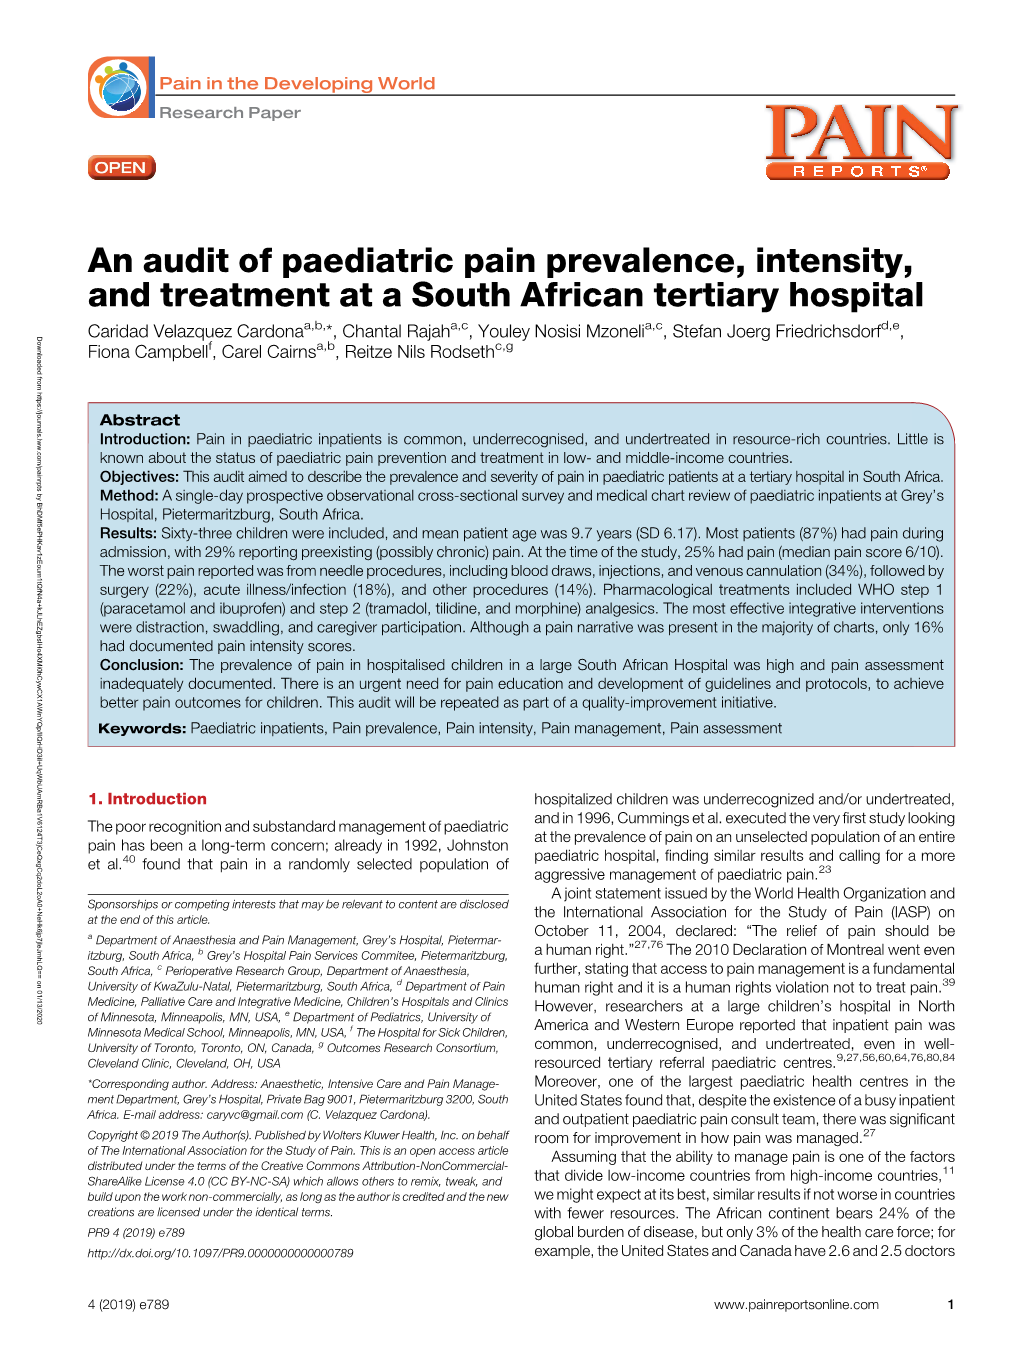 An Audit of Paediatric Pain Prevalence, Intensity, and Treatment at a South African Tertiary Hospital